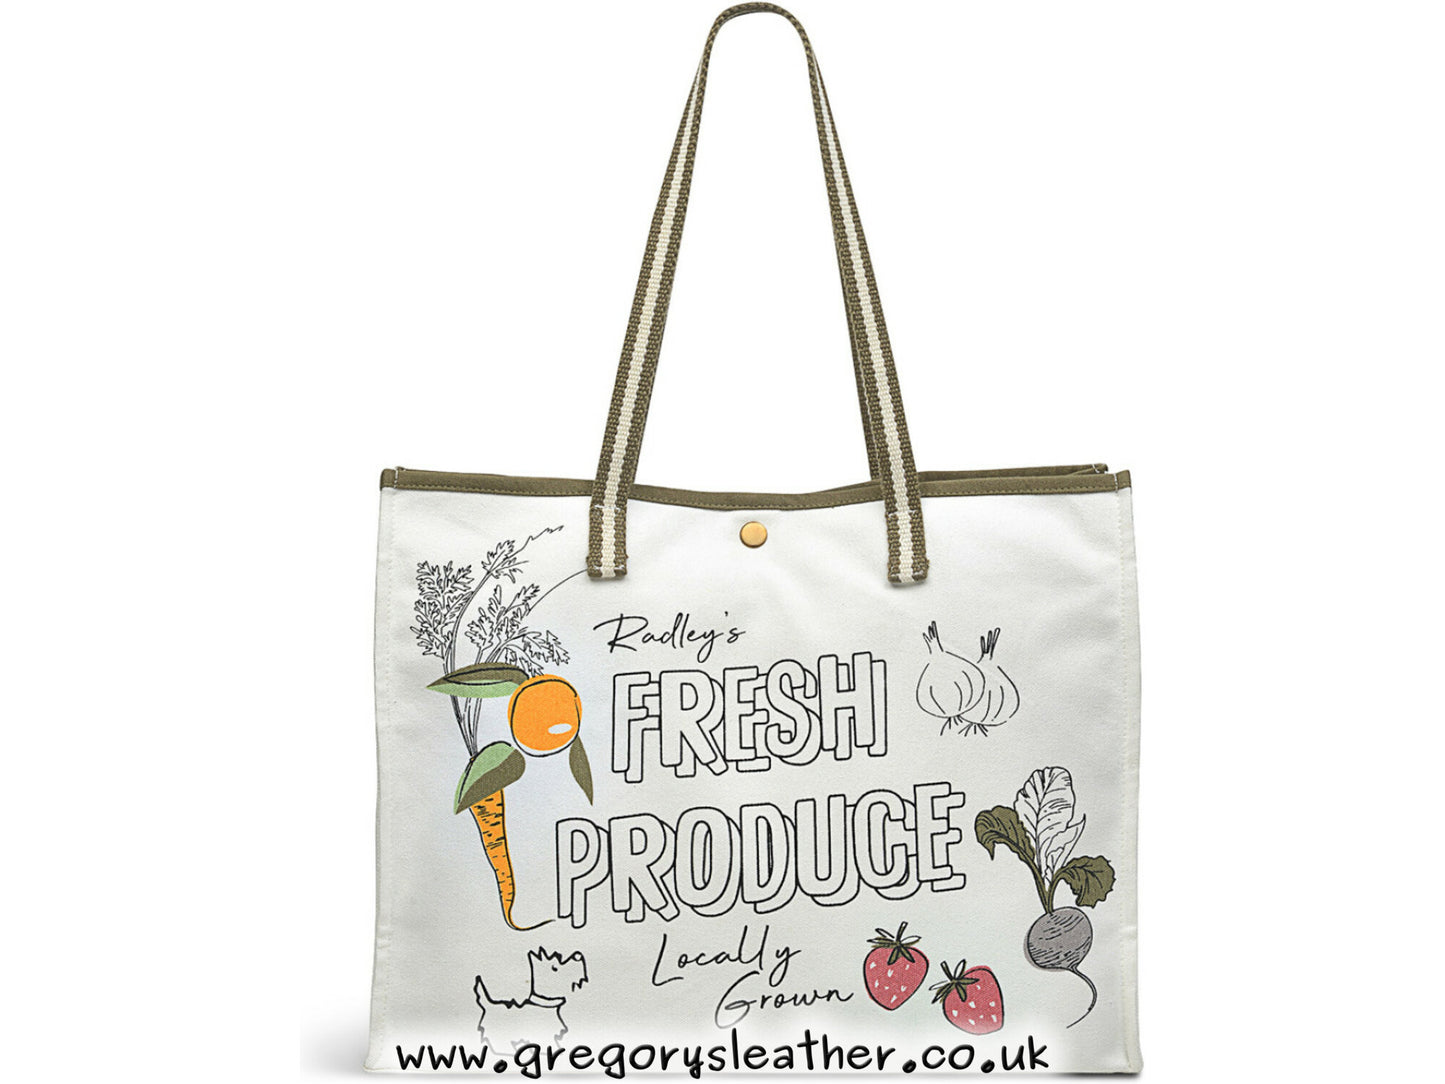 Fresh Produce Large Open Top Tote by Radley